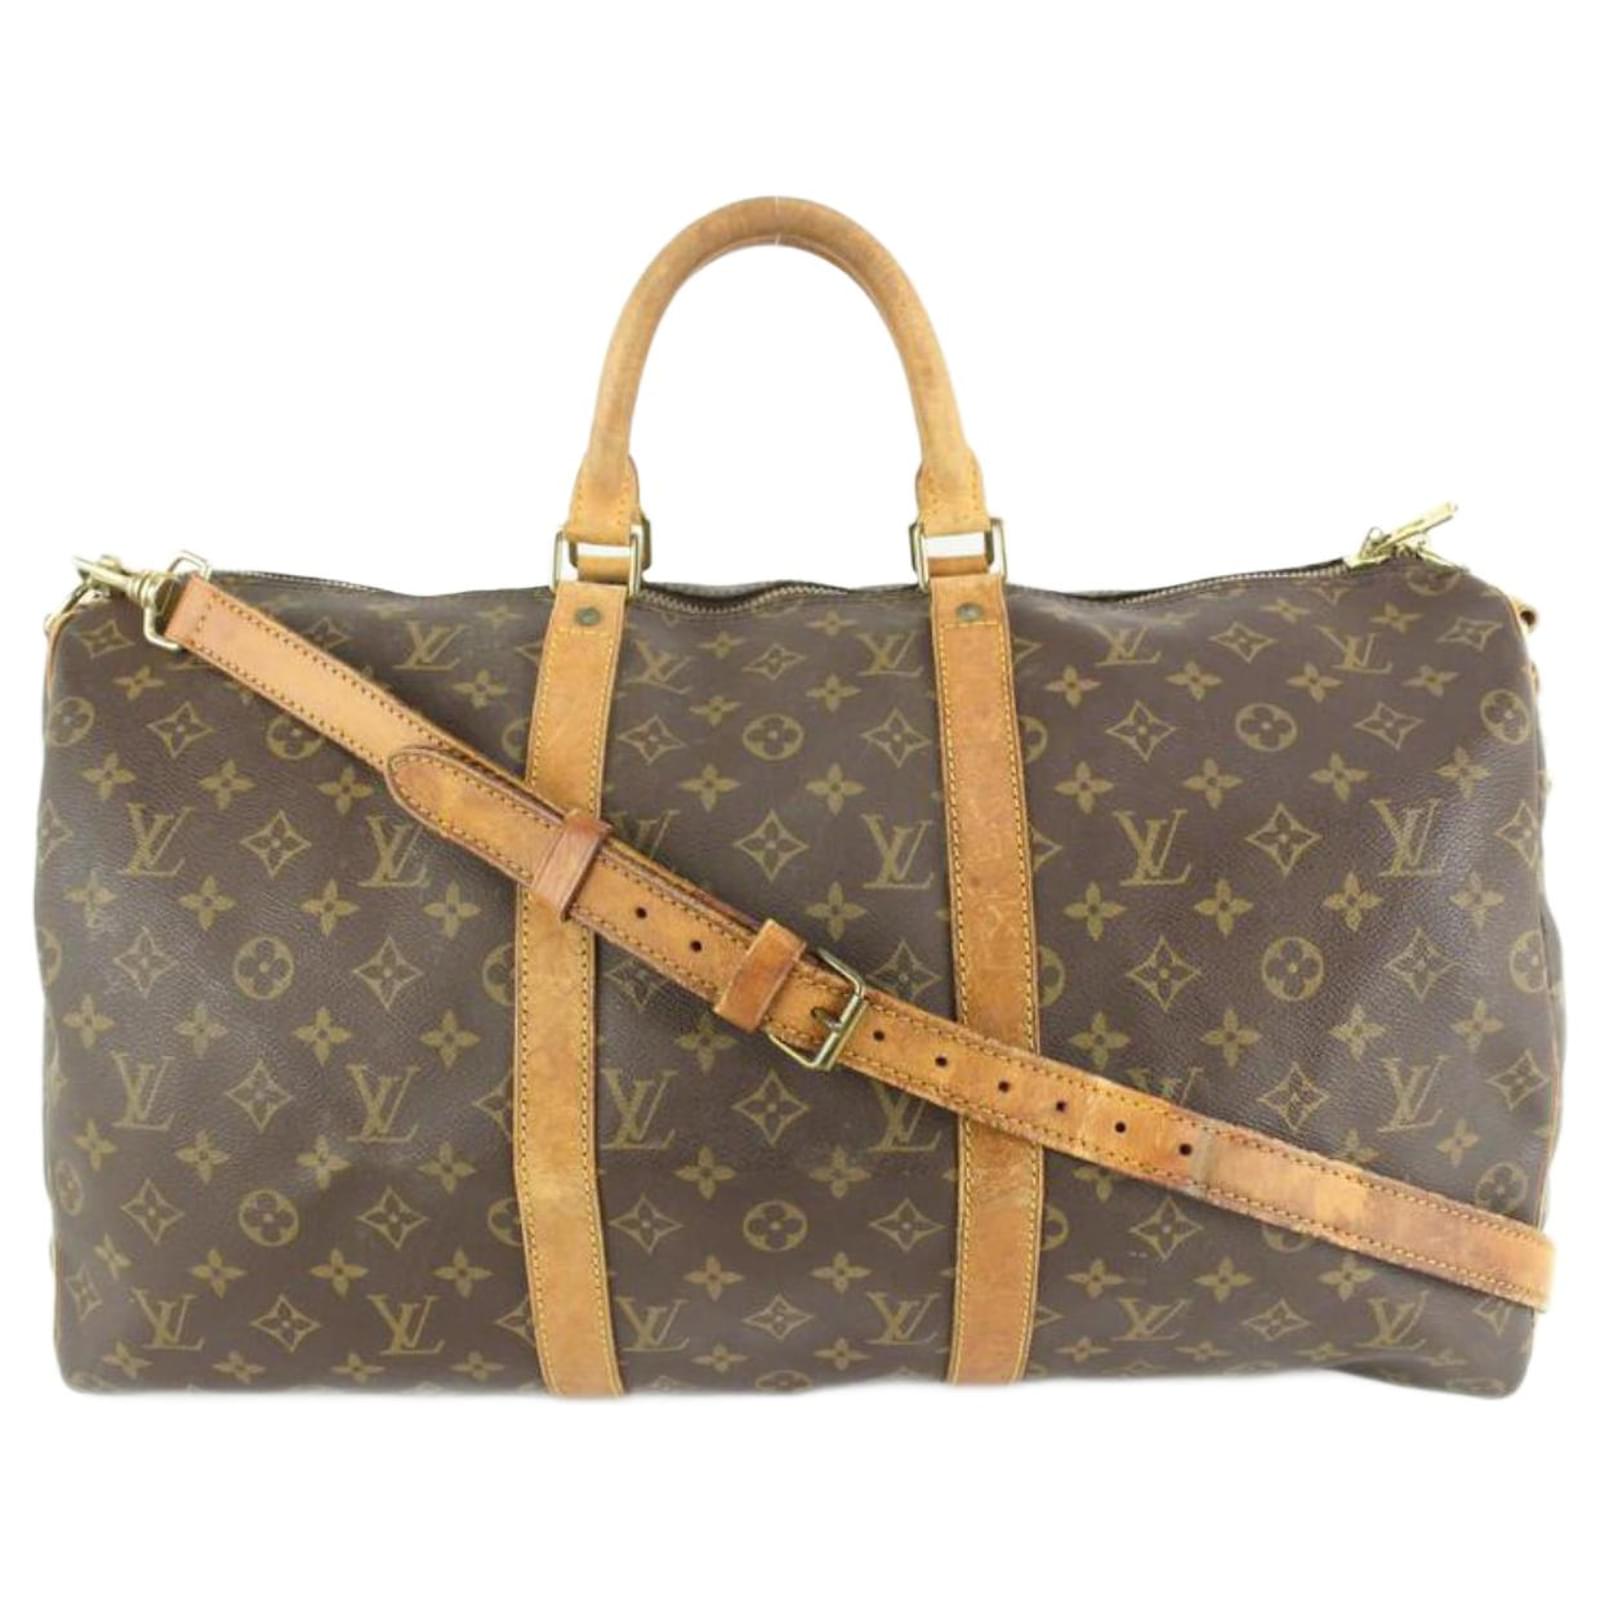 Louis Vuitton Monogram Keepall Bandouliere 50 Duffle Bag with